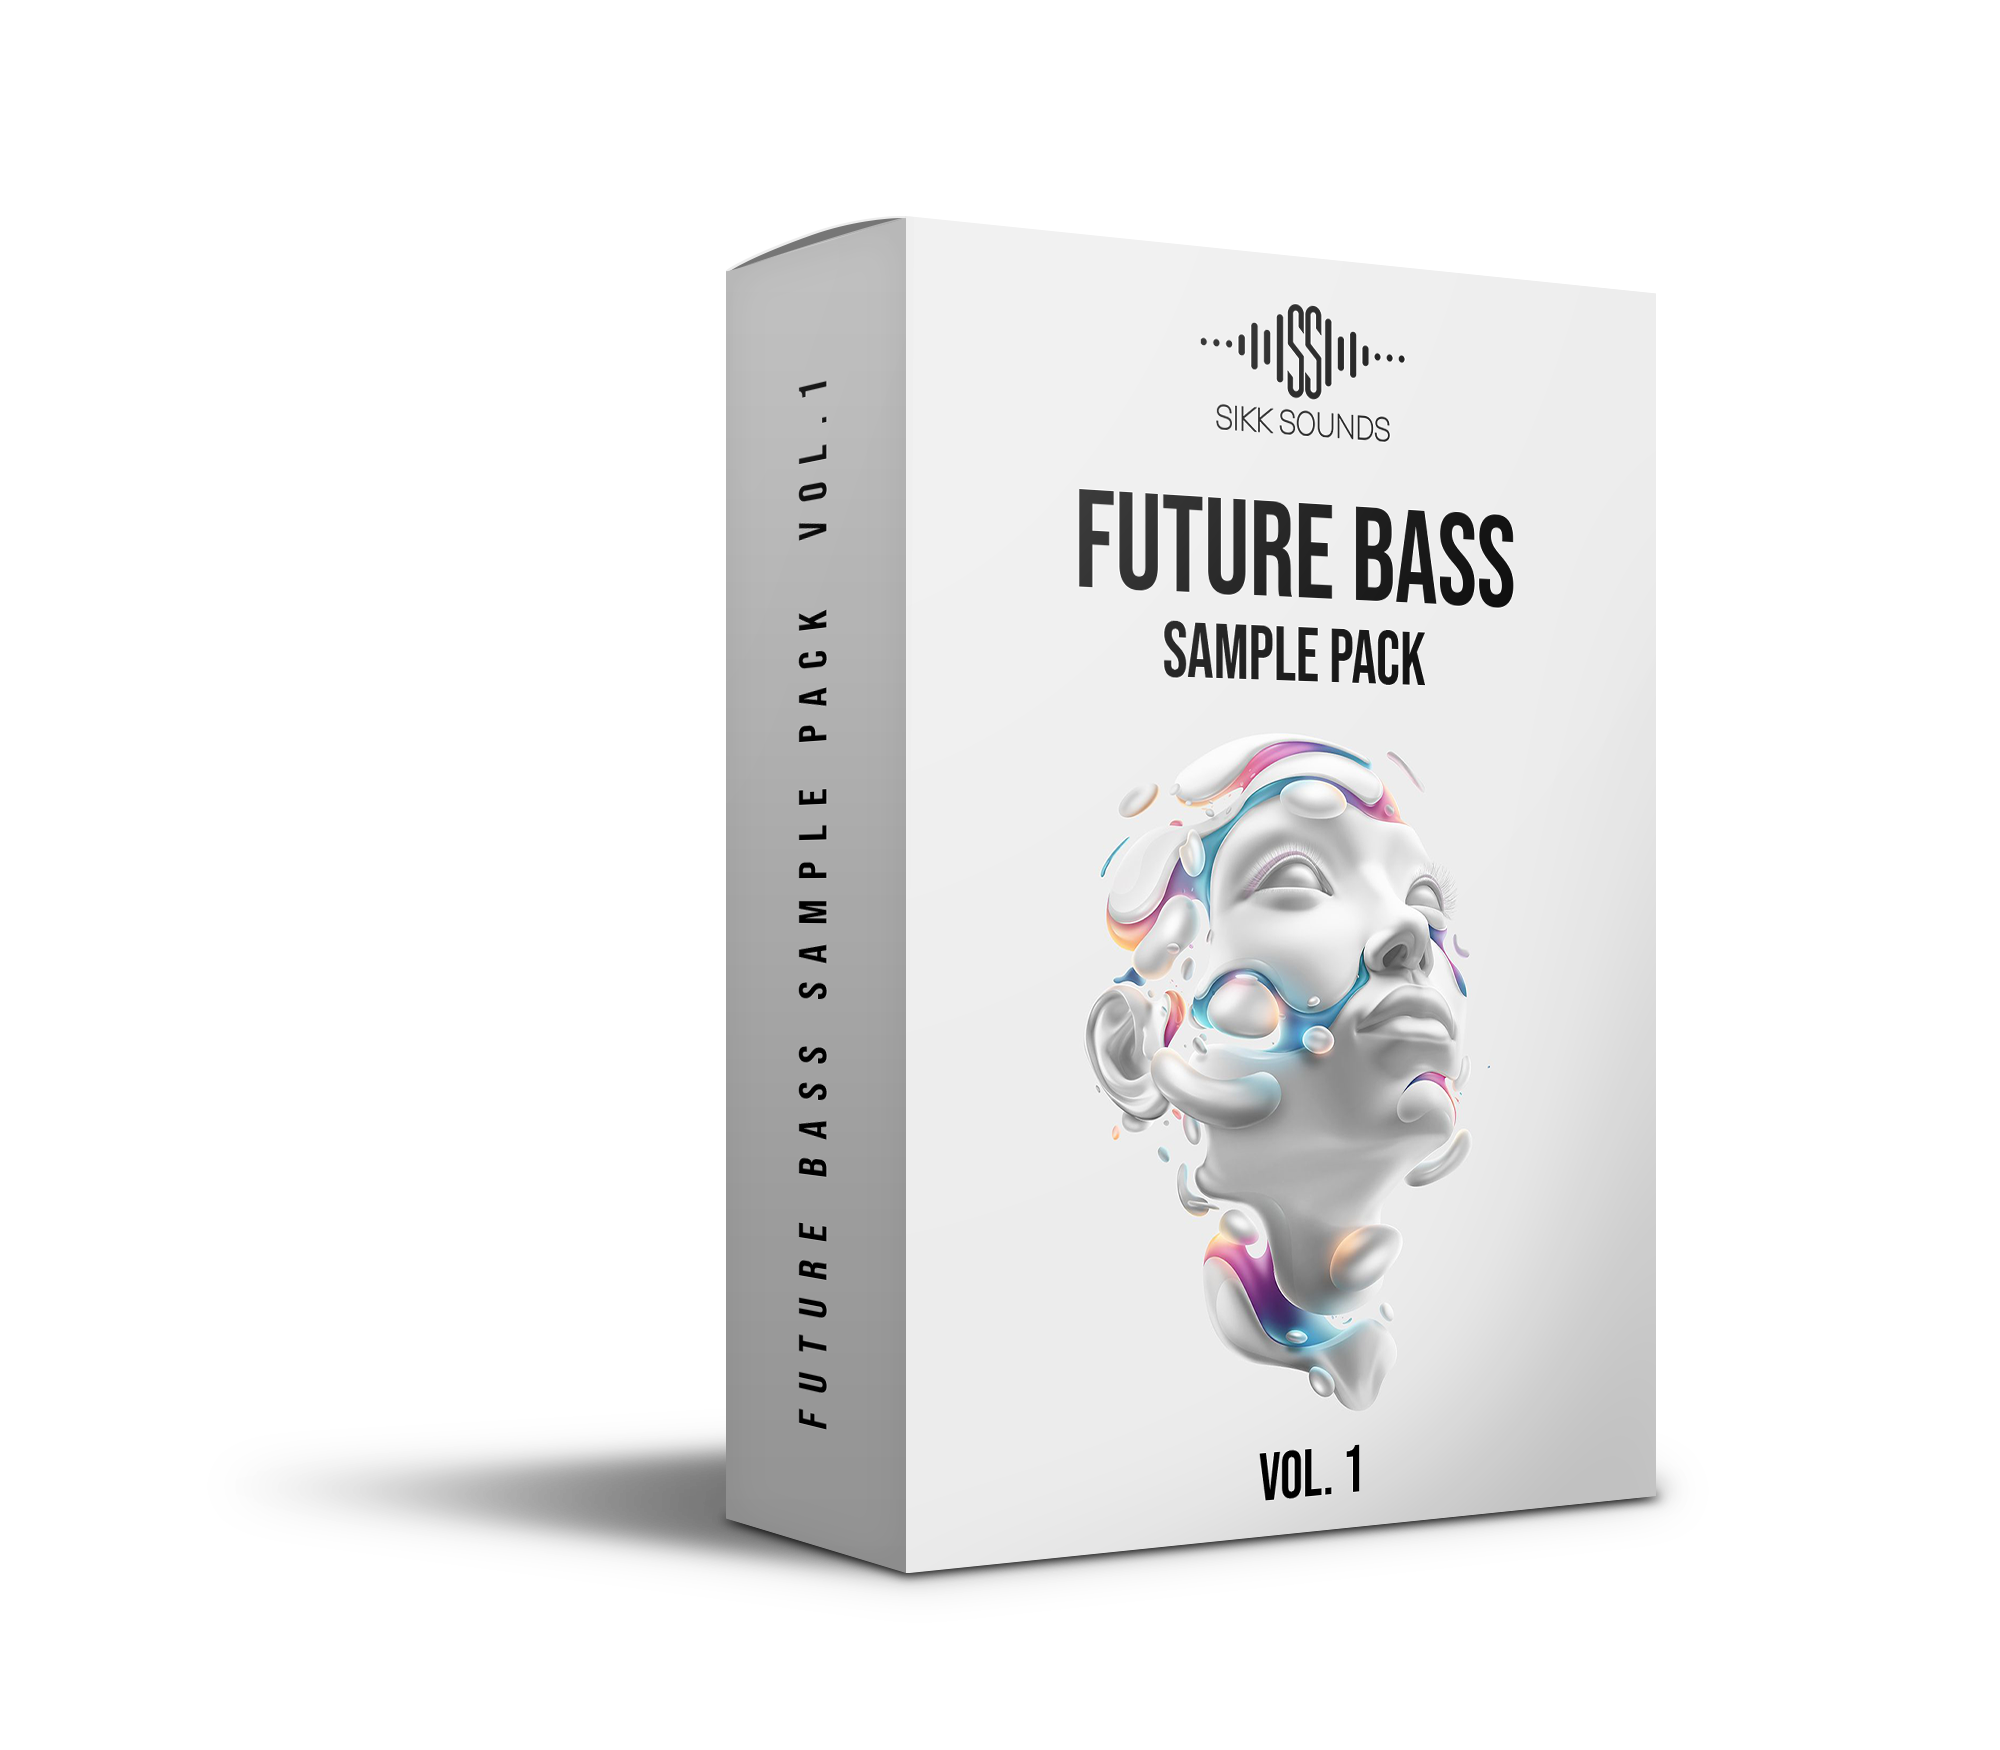 SiKKSounds Future Bass Sample Pack Vol.1